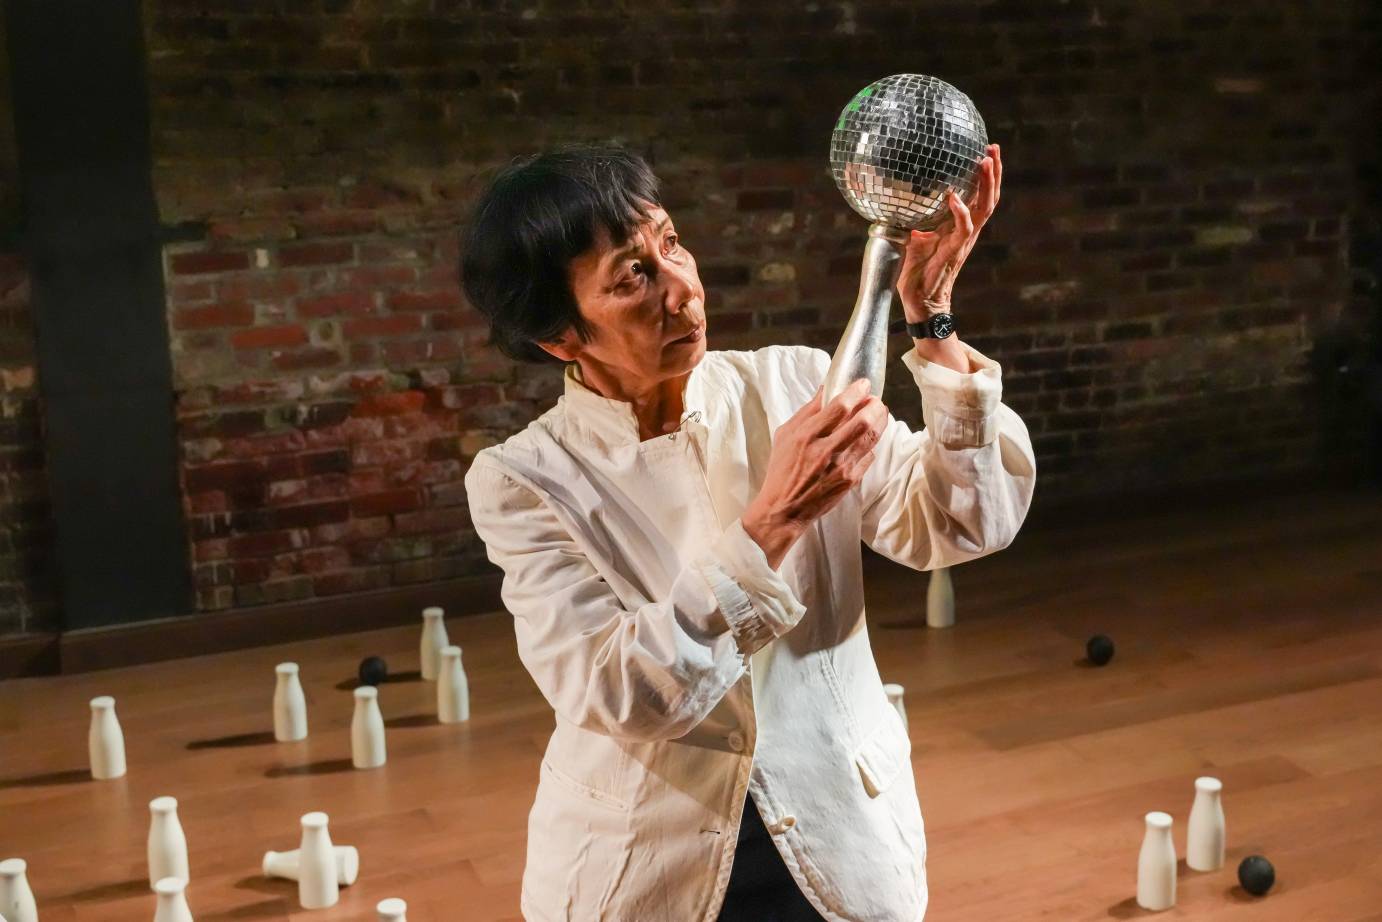 Woman in white jacket and short black hair holds up a metal orb to her left and stares at it. The background floor is littered with wooden, white milk bottles..